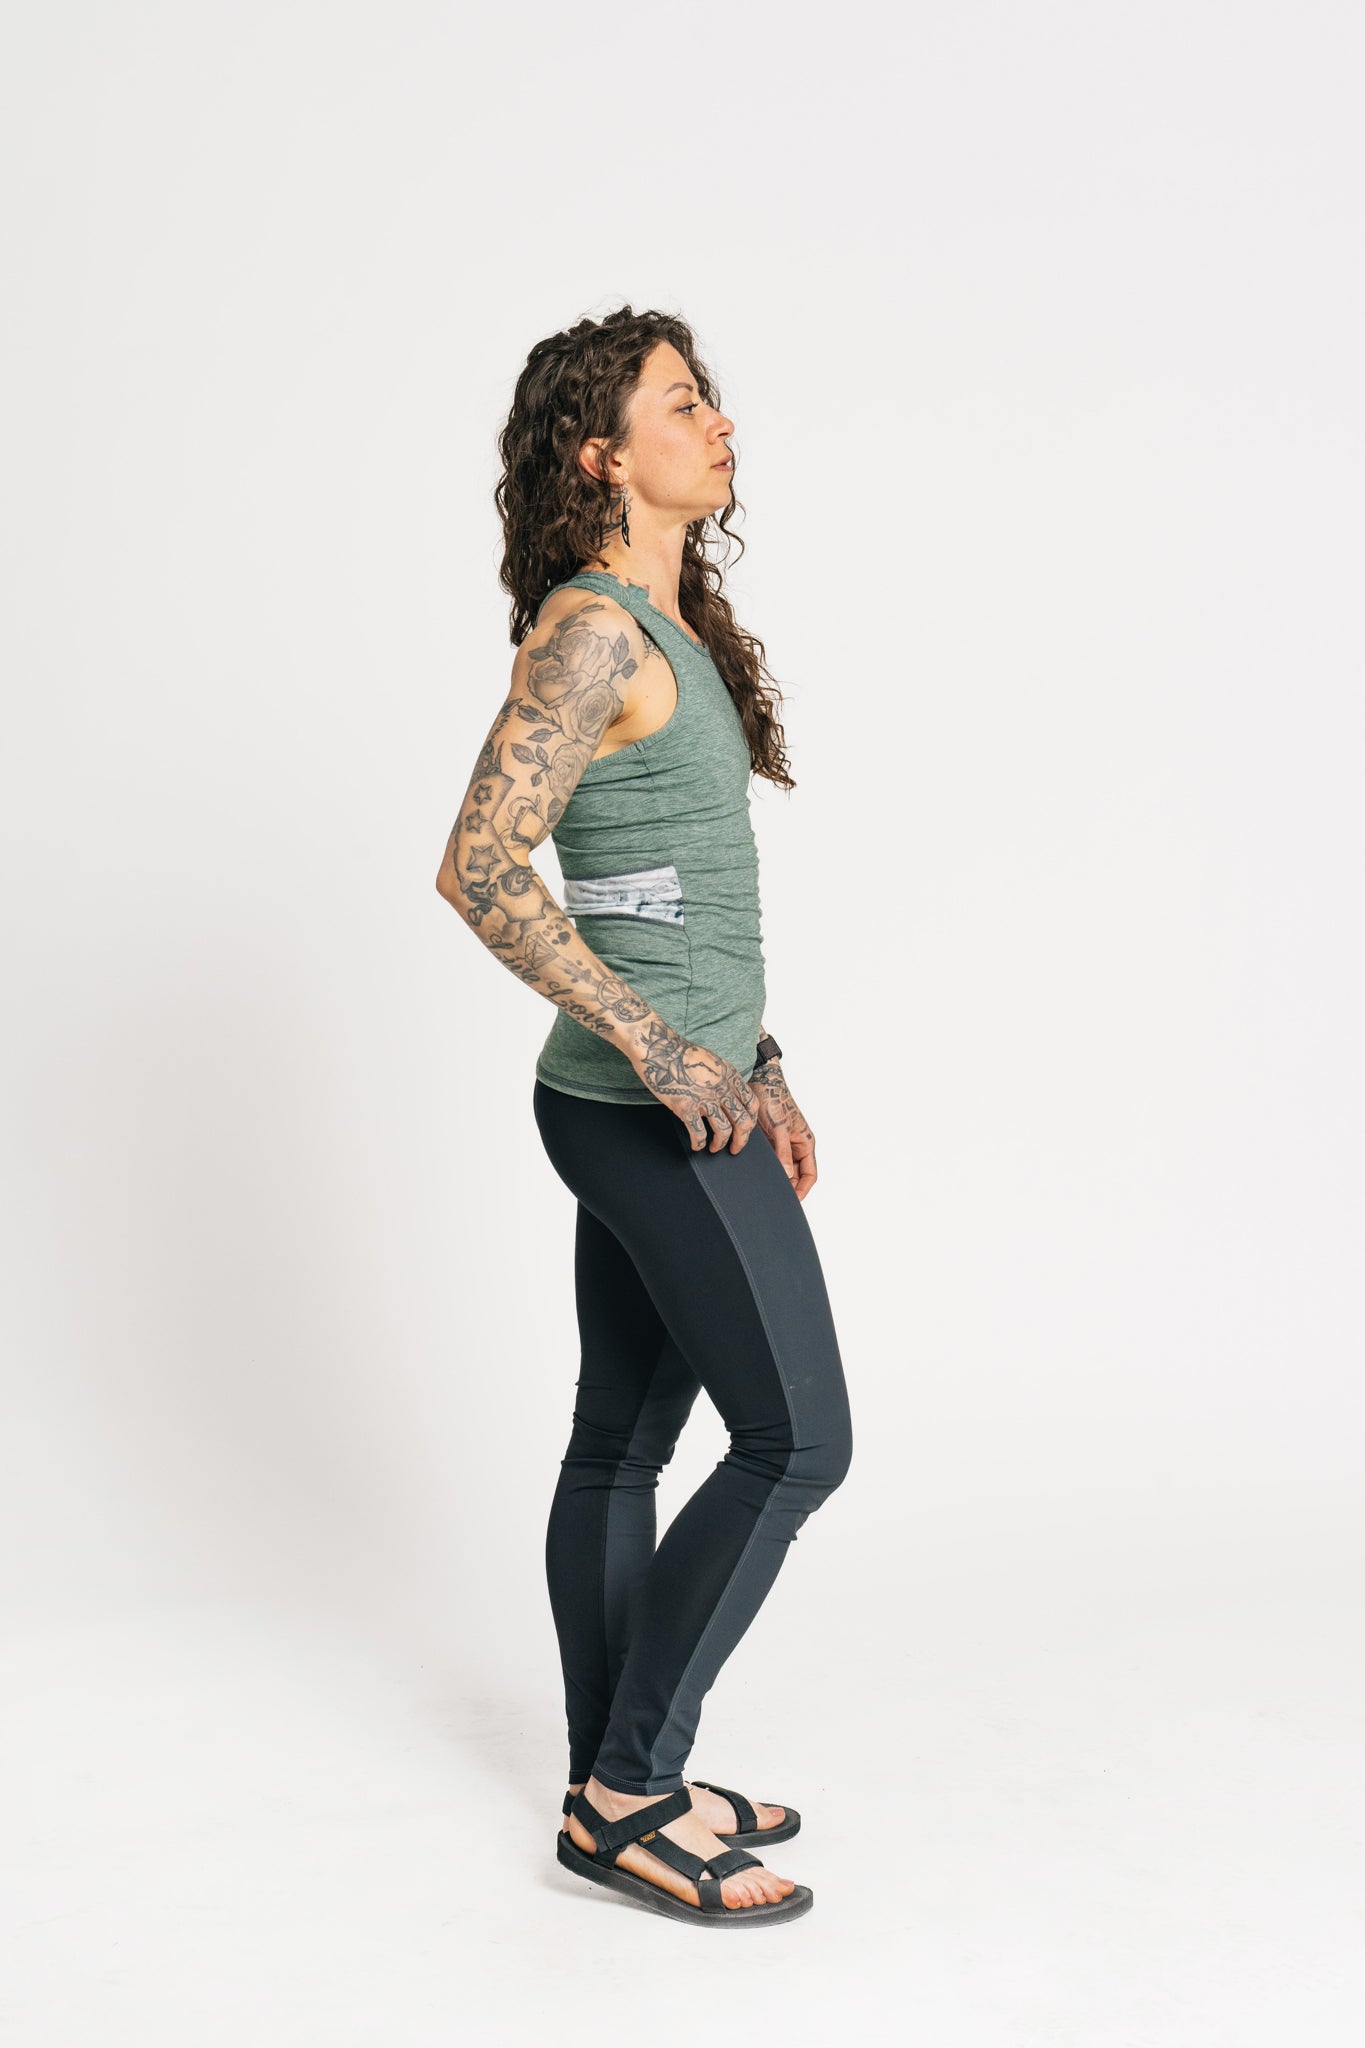 alpine fit hiking leggings on model with tattoo side view